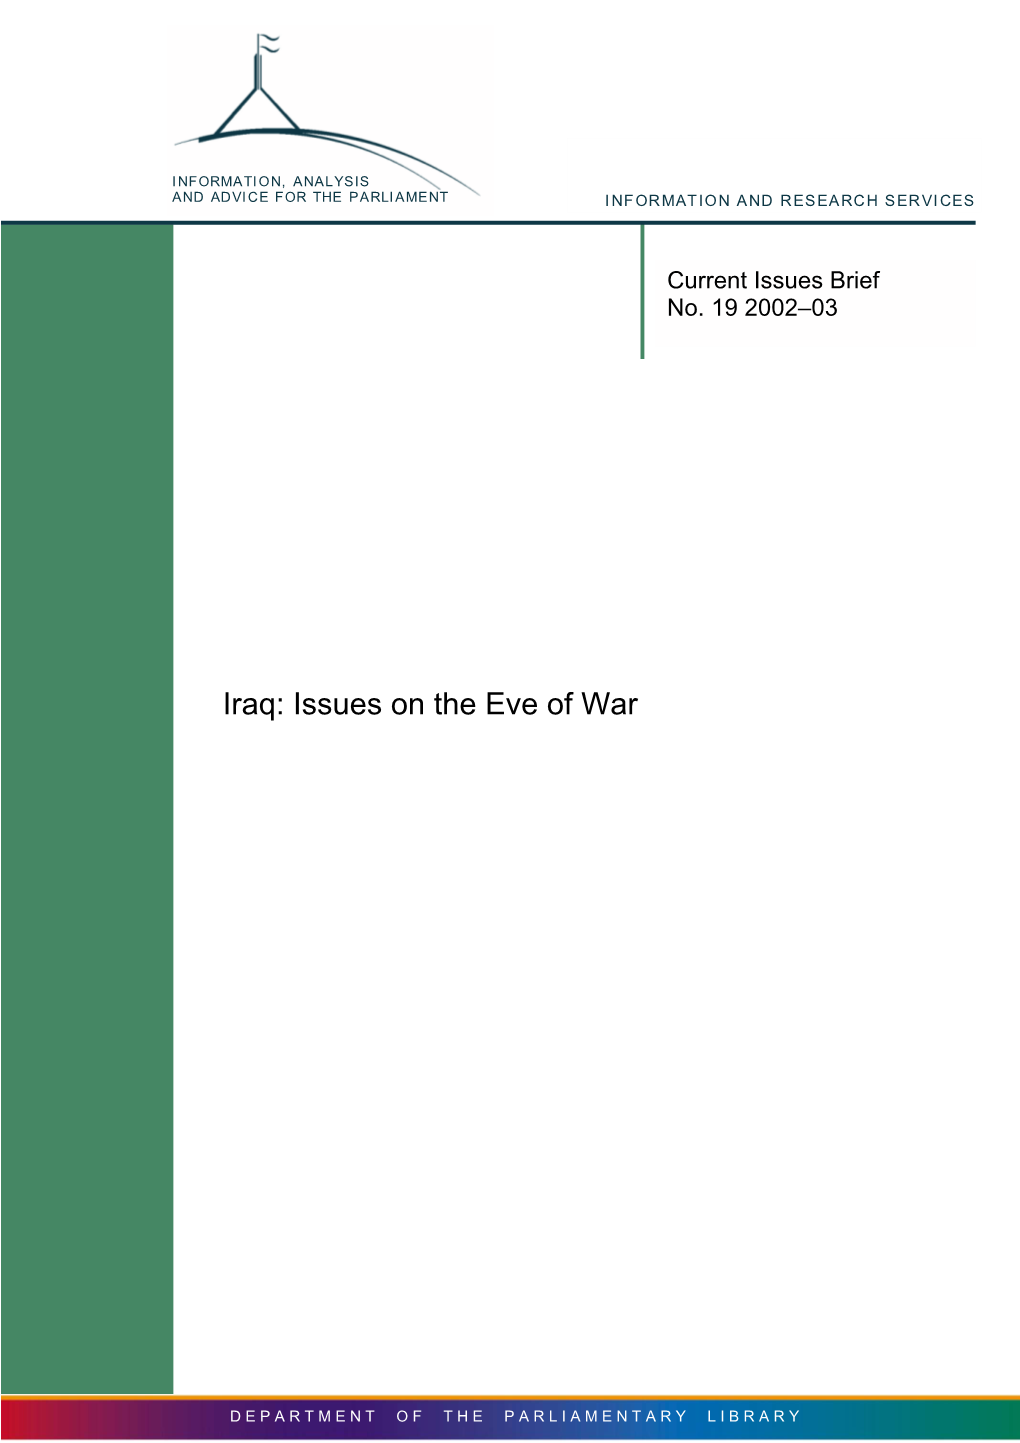 Iraq: Issues on the Eve of War